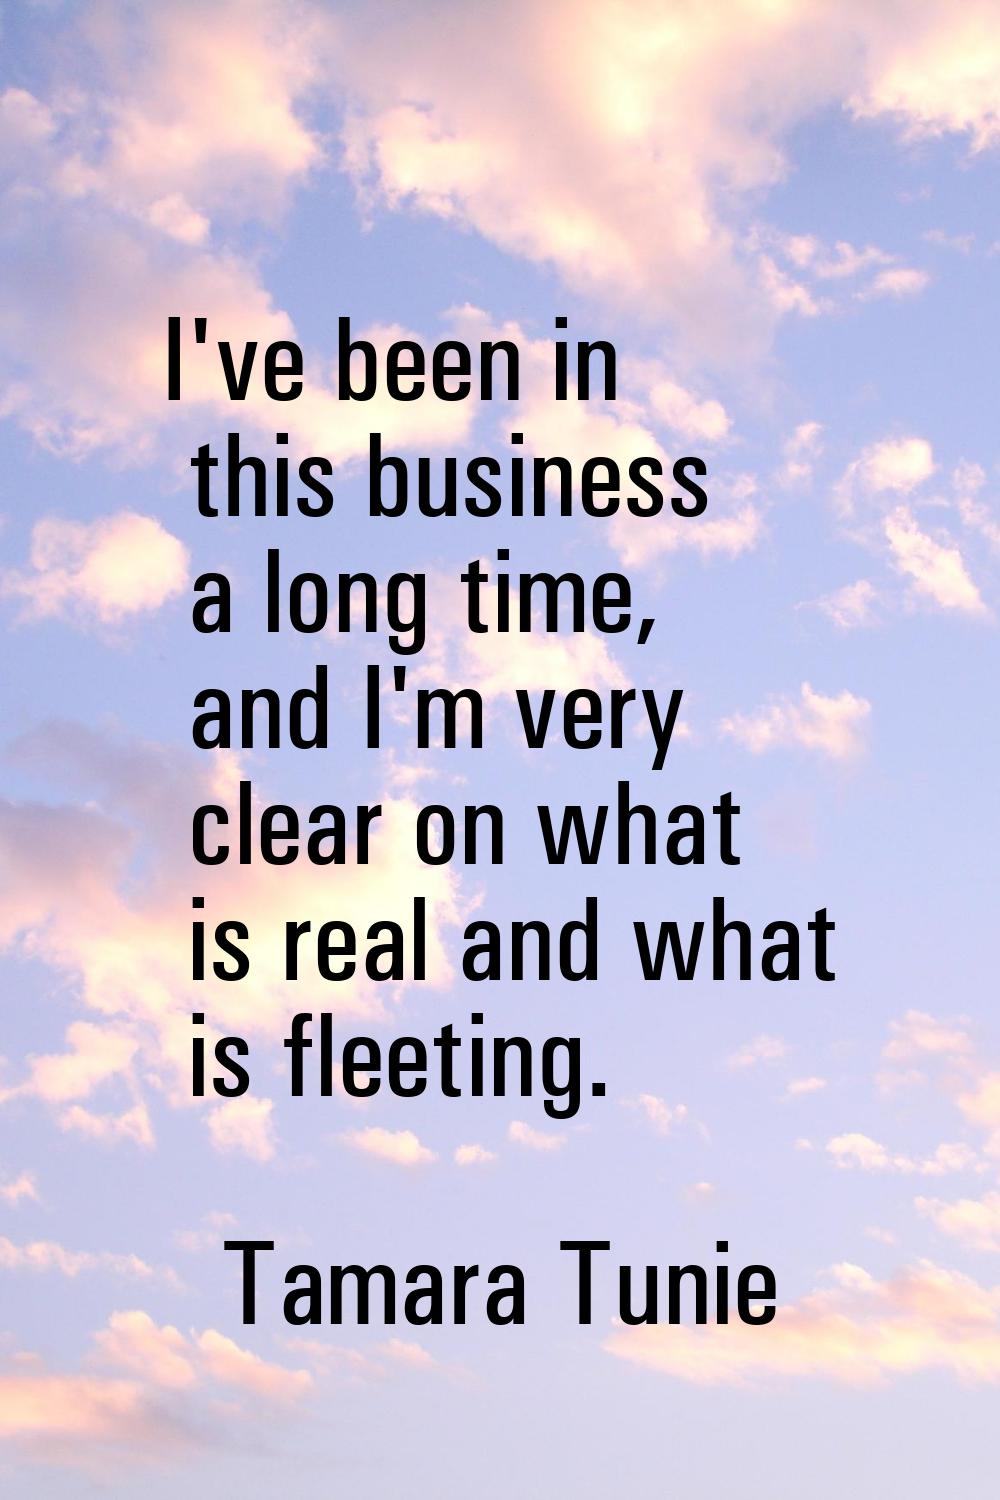 I've been in this business a long time, and I'm very clear on what is real and what is fleeting.